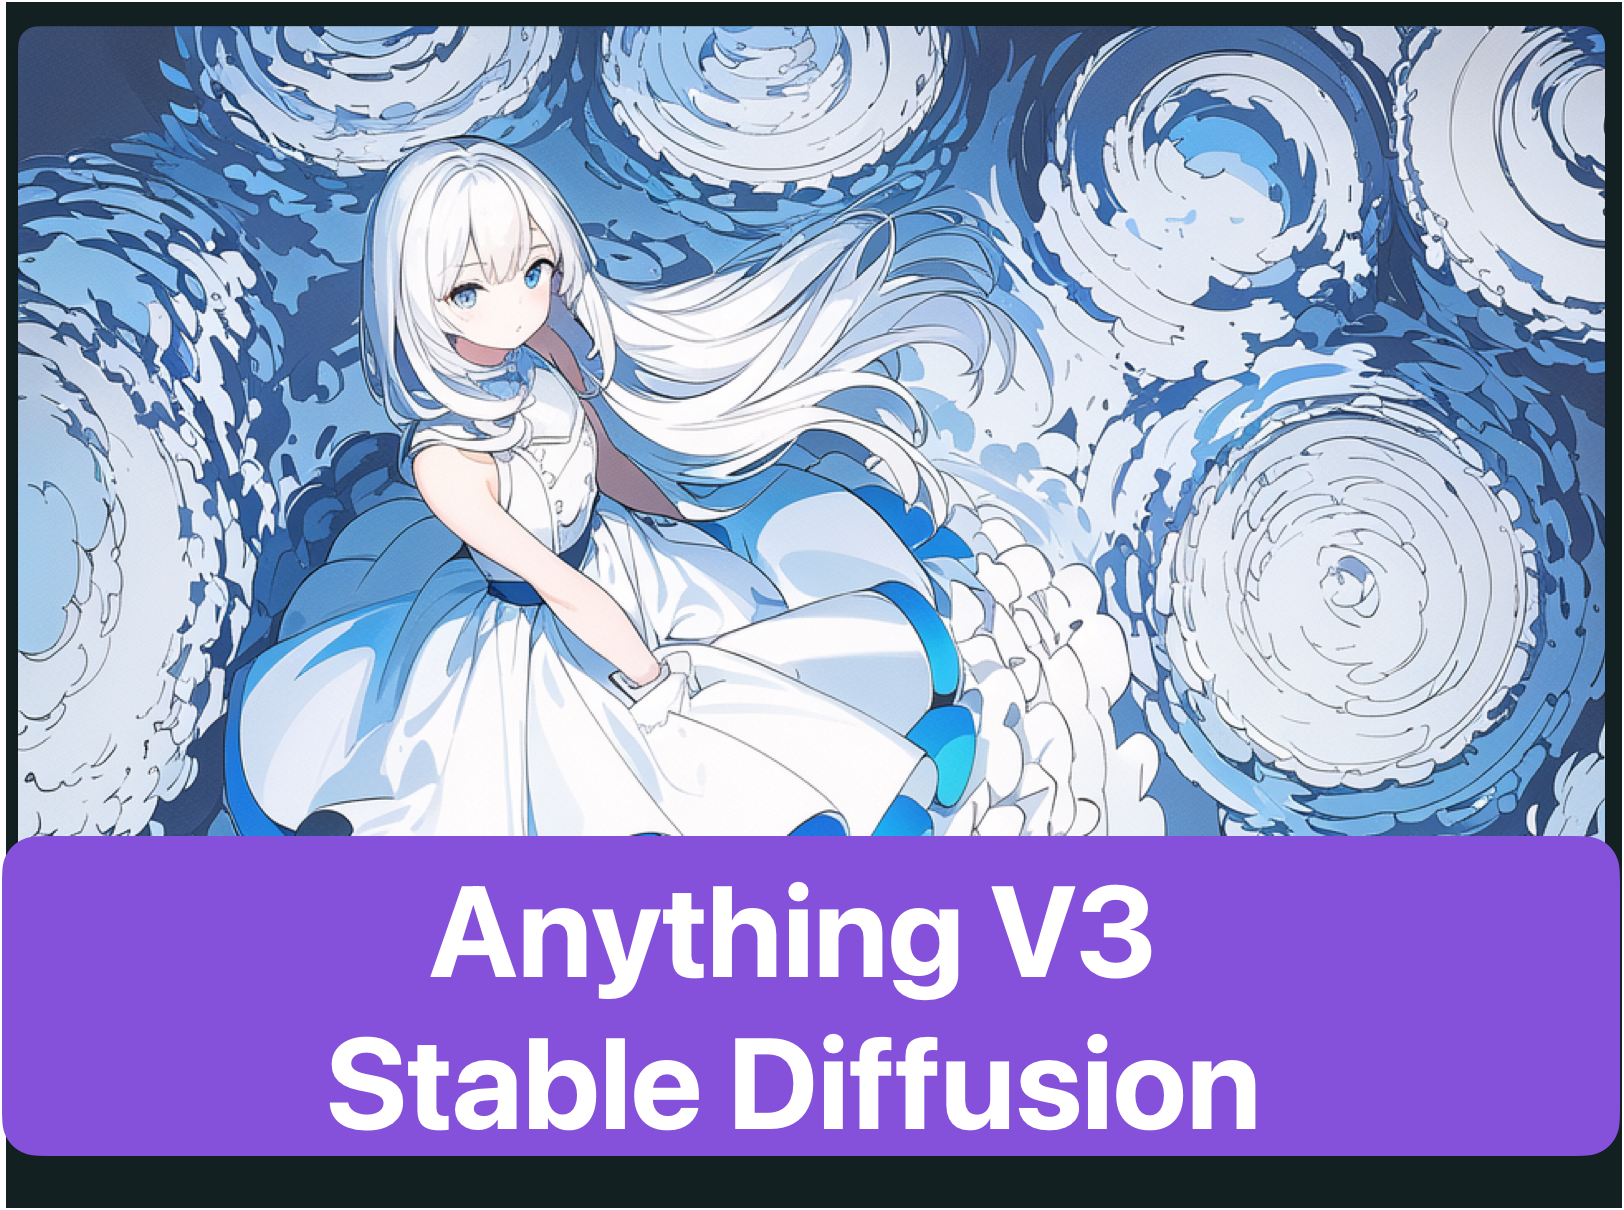 Stable Diffusion Models for Anything V3